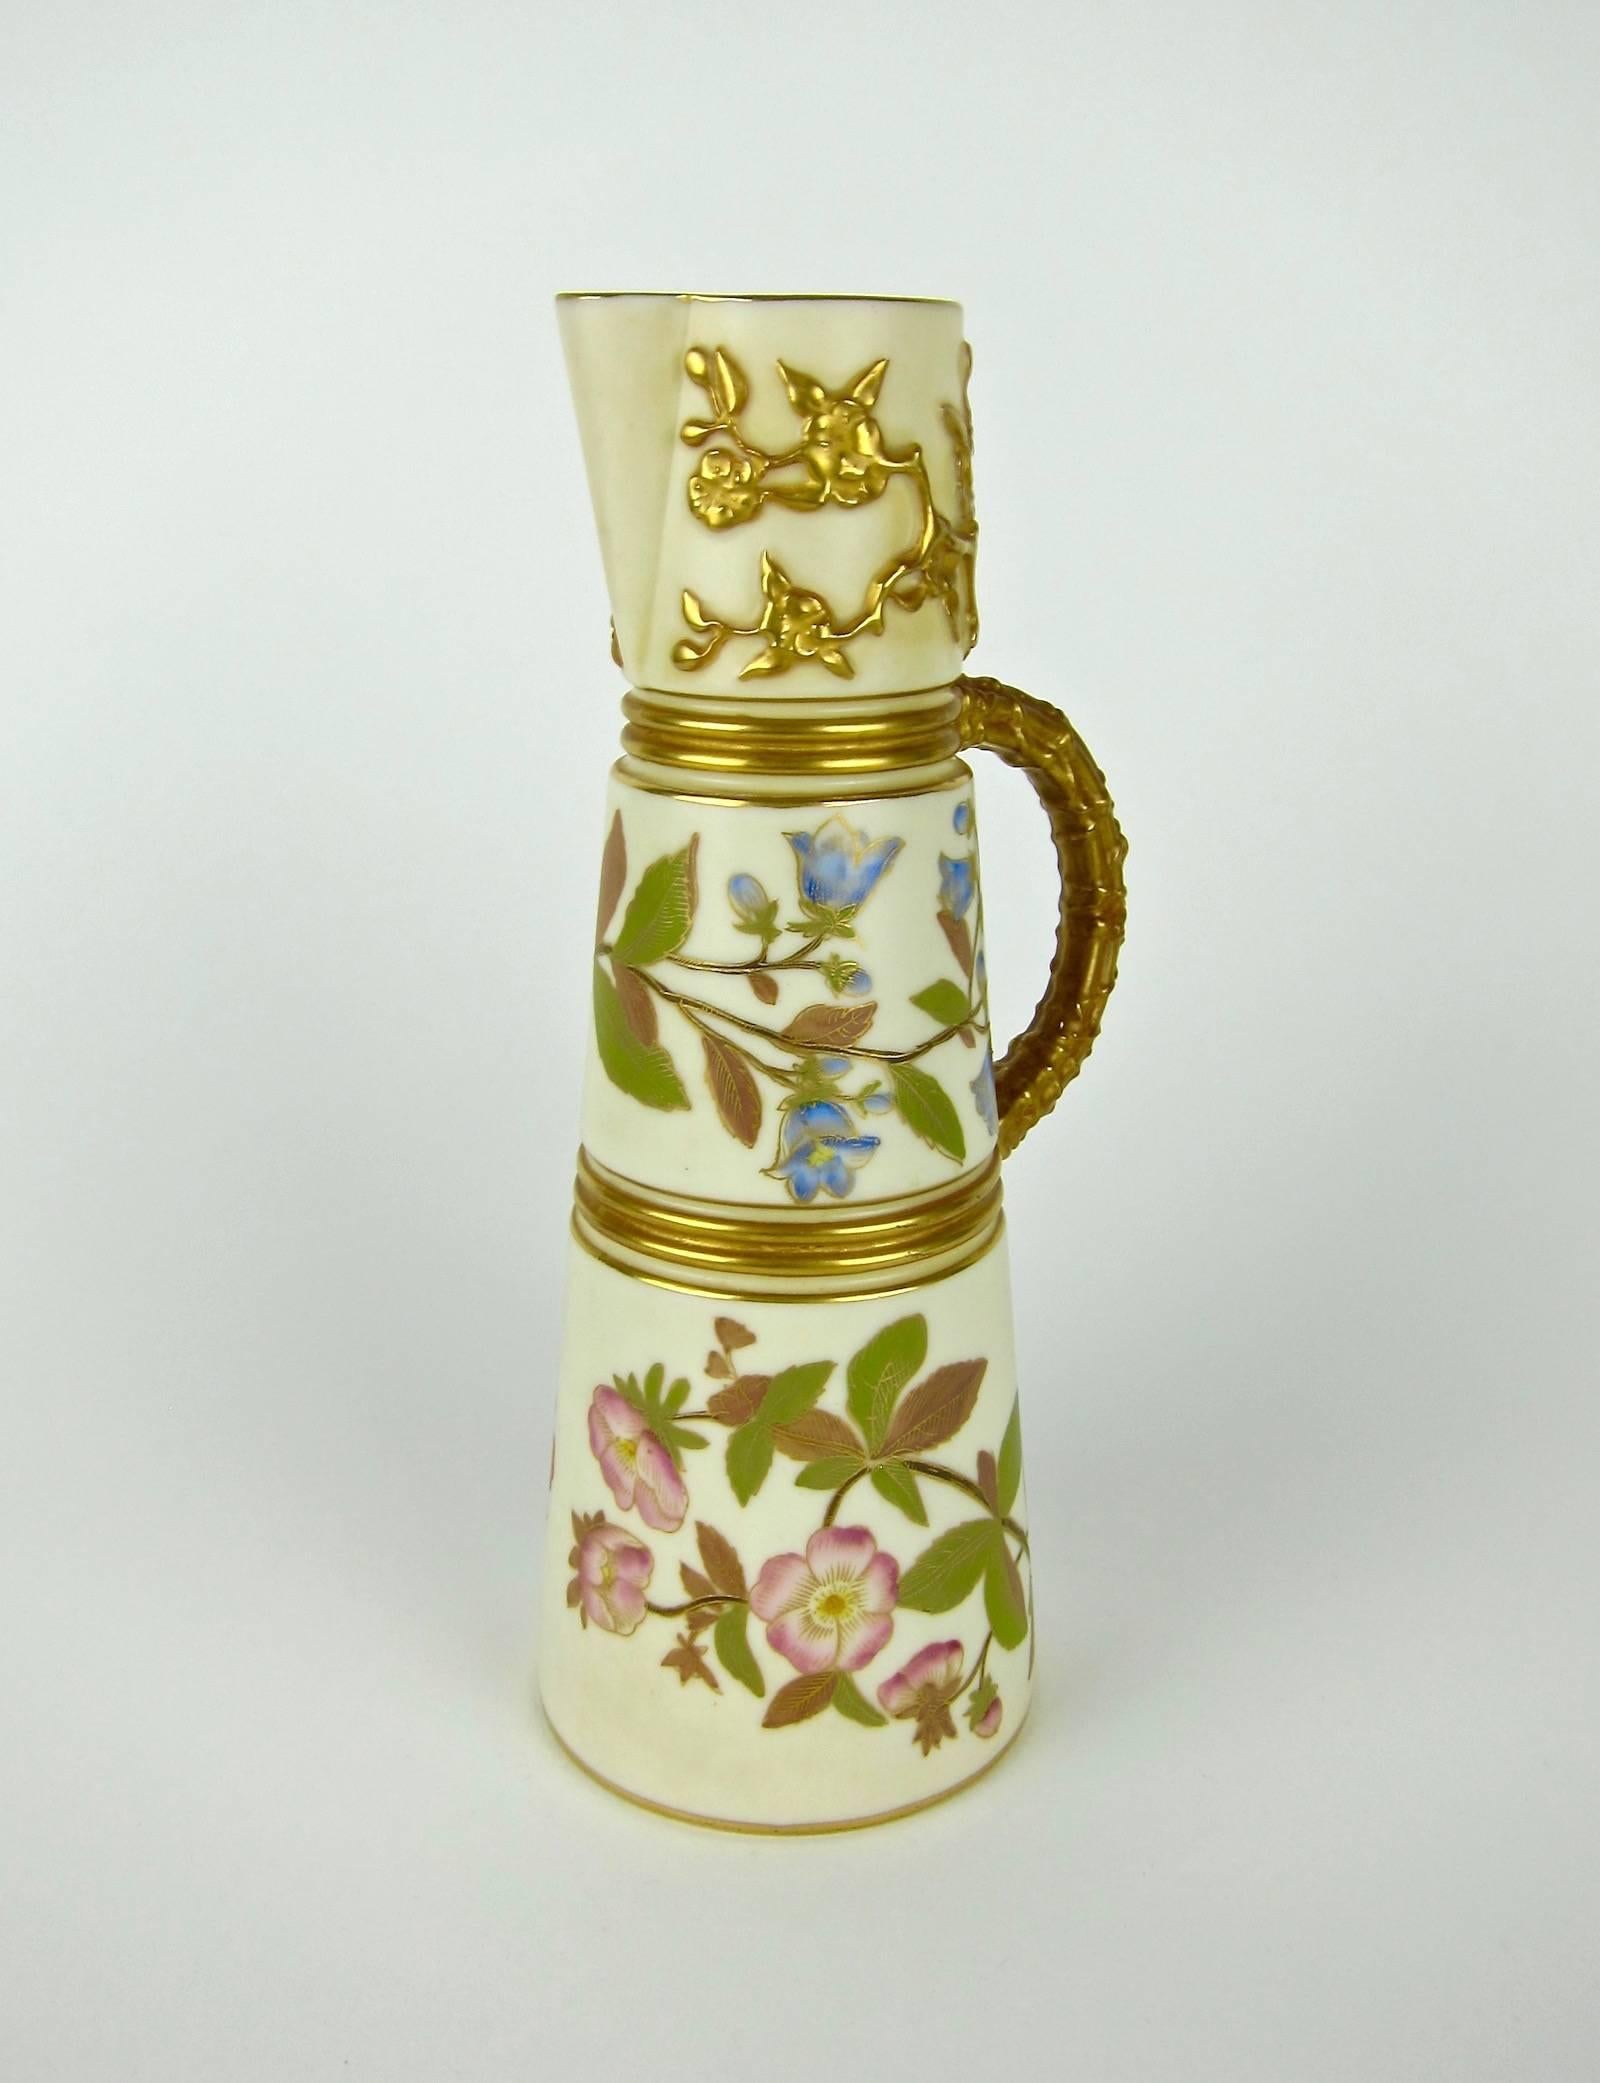 A fine late 19th century ivory porcelain ewer by Royal Worcester of England, date marked for 1884. This exquisite antique pitcher is decorated with hand-painted Japanese floral motifs characteristic of Aesthetic Movement and Victorian era ornament